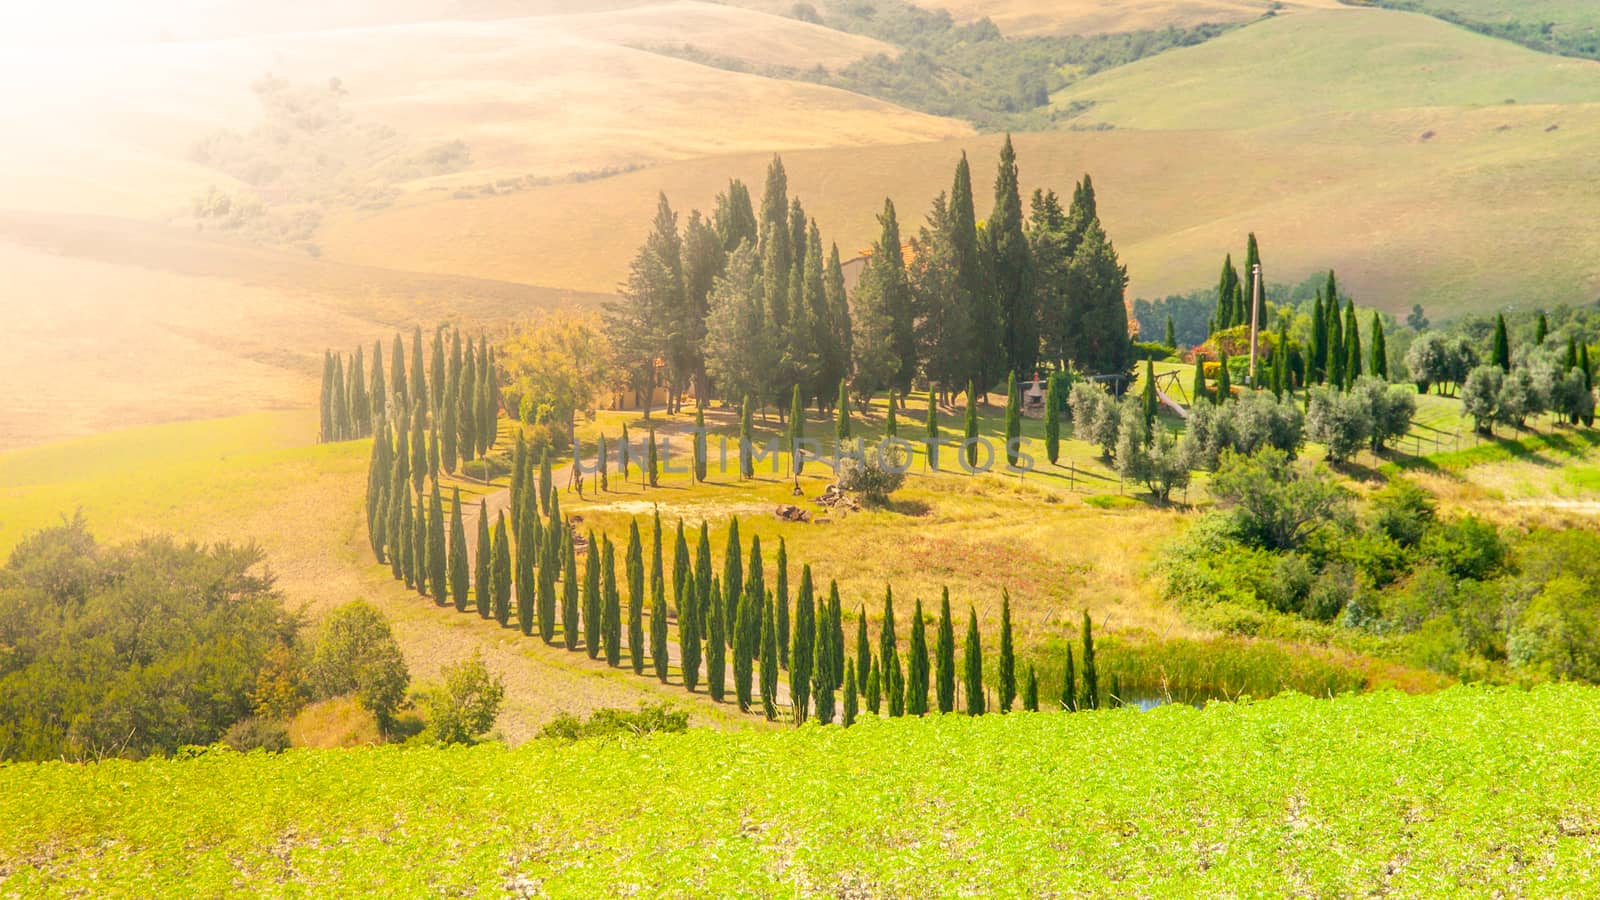 Evening in Tuscany. Hilly Tuscan landscape with cypress trees alley and farm house, Italy.